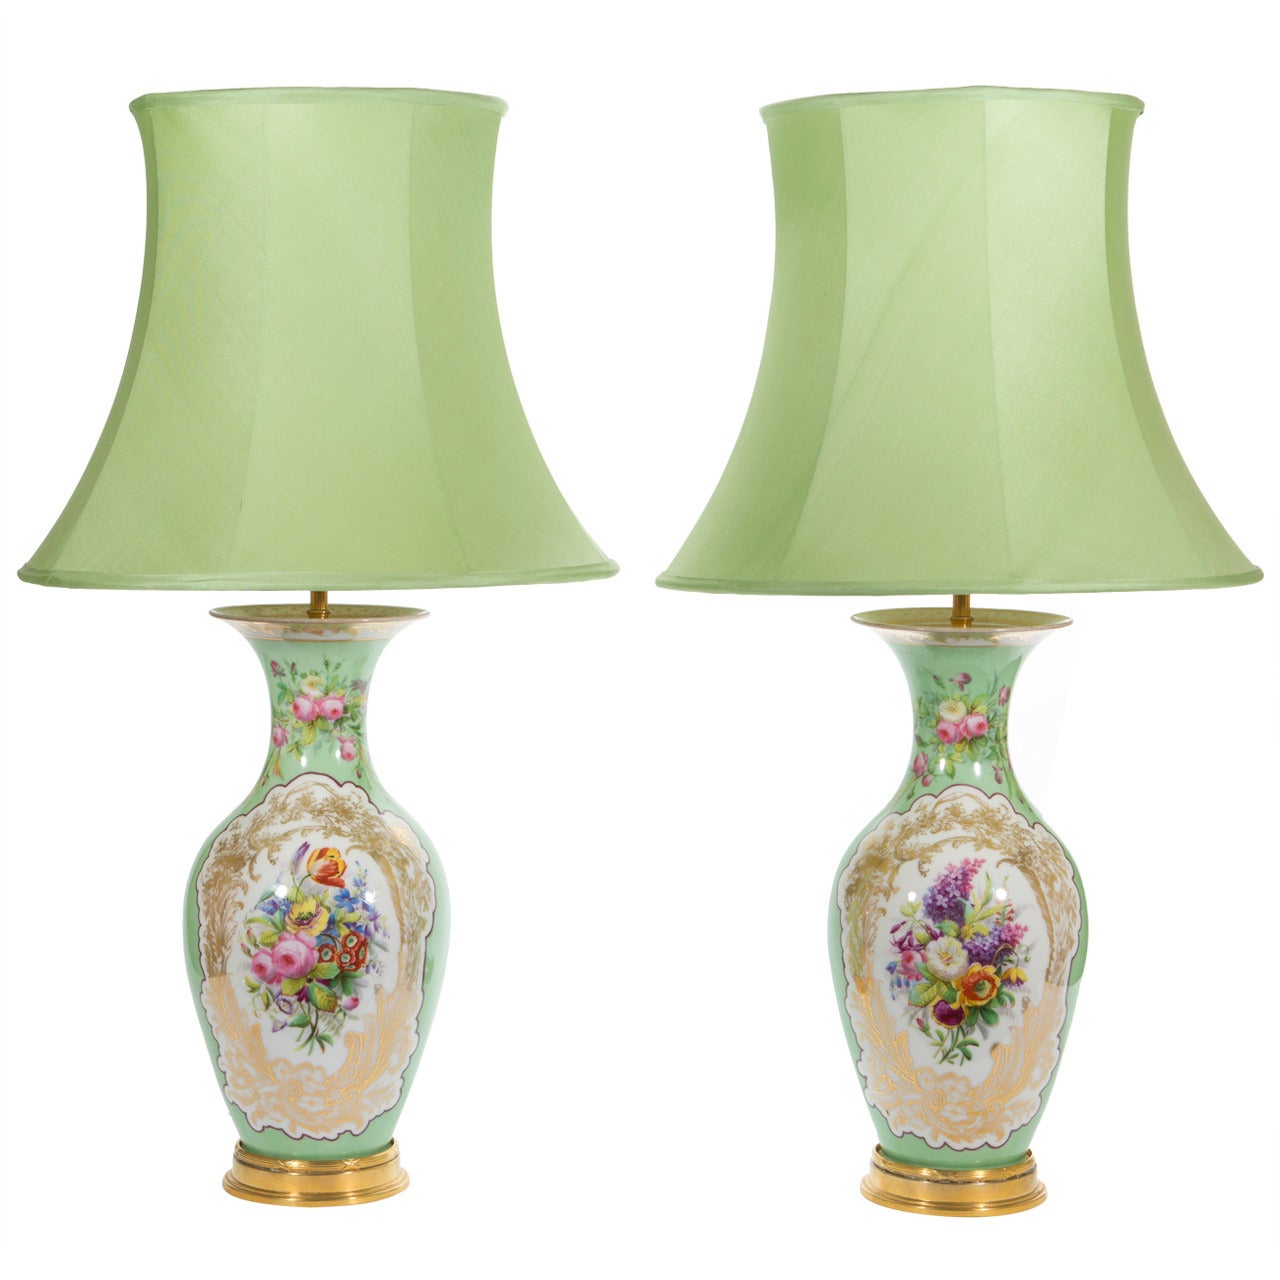 A Pair of porcelain Vases as Lamps: French, circa 1840